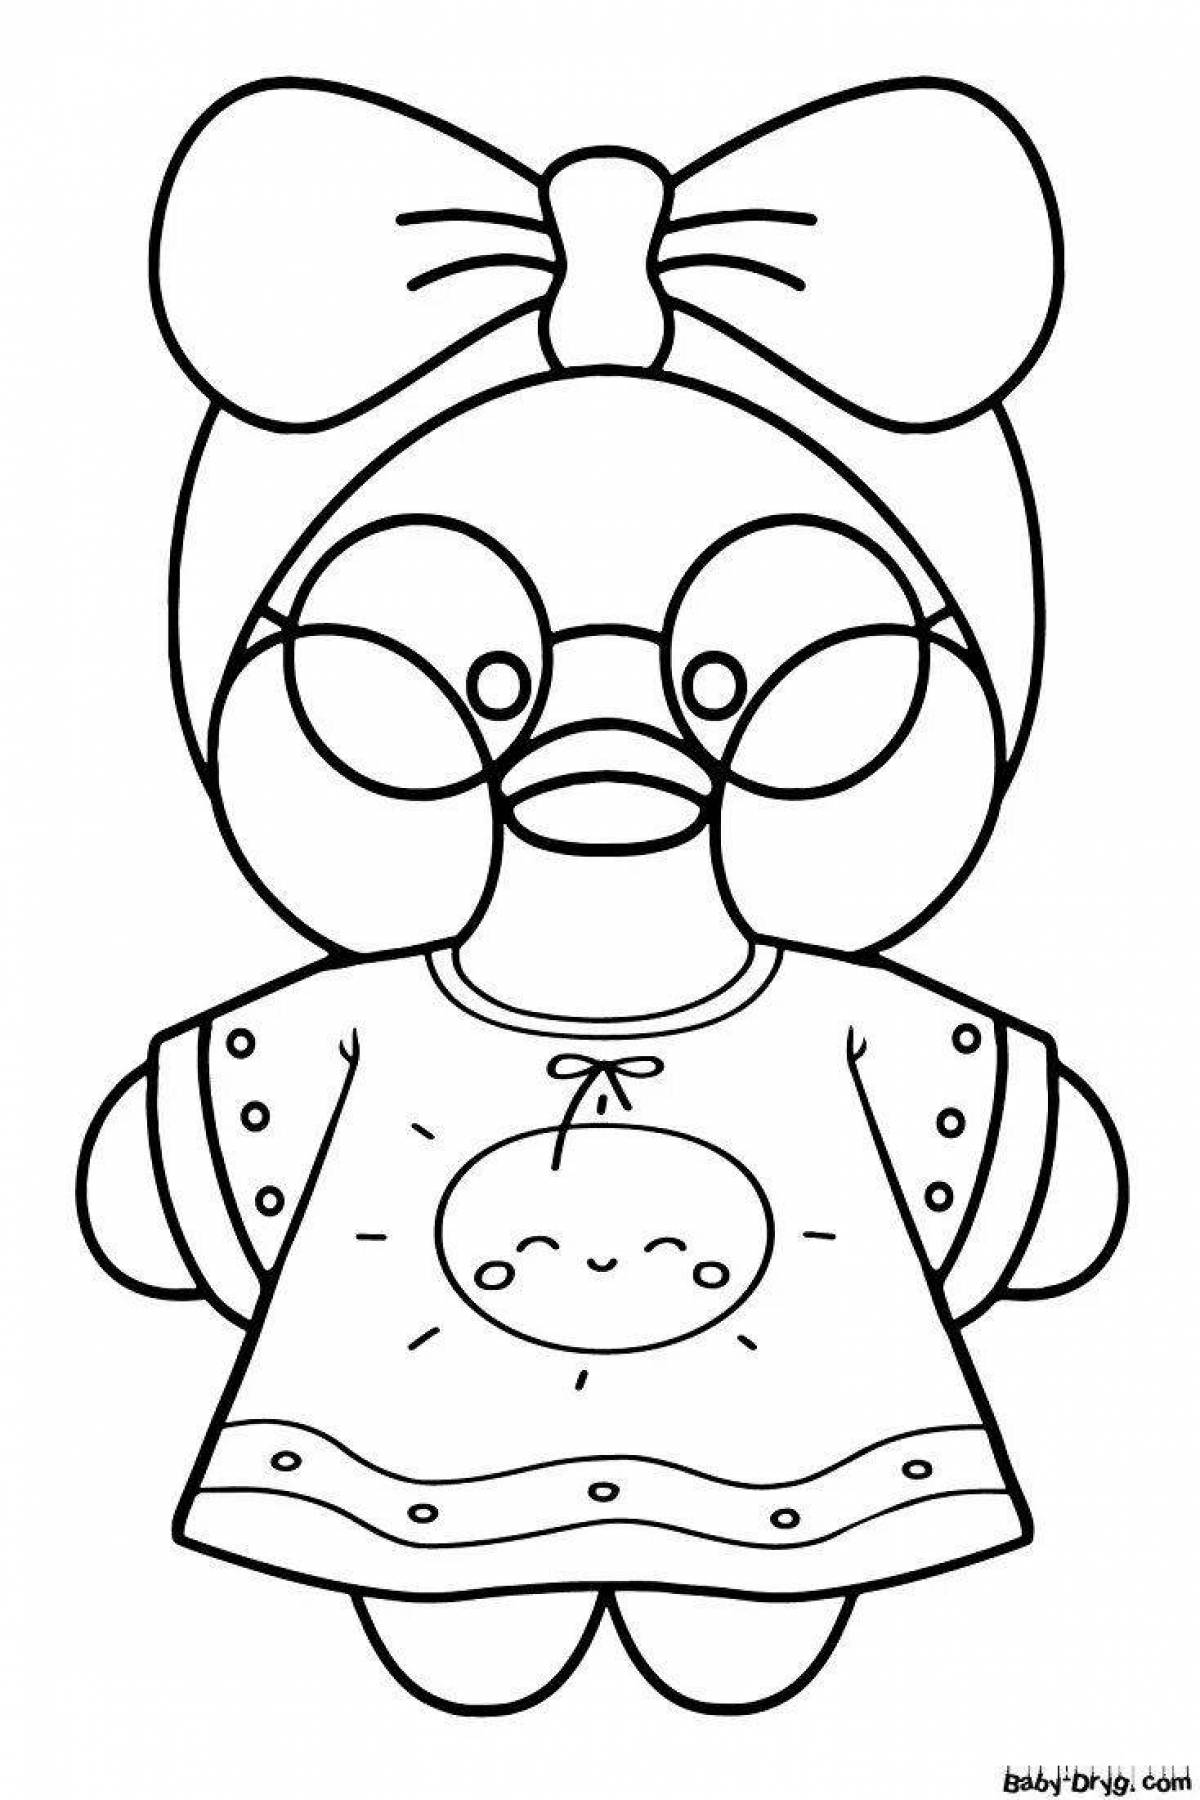 Lalafanfan cute duck coloring page